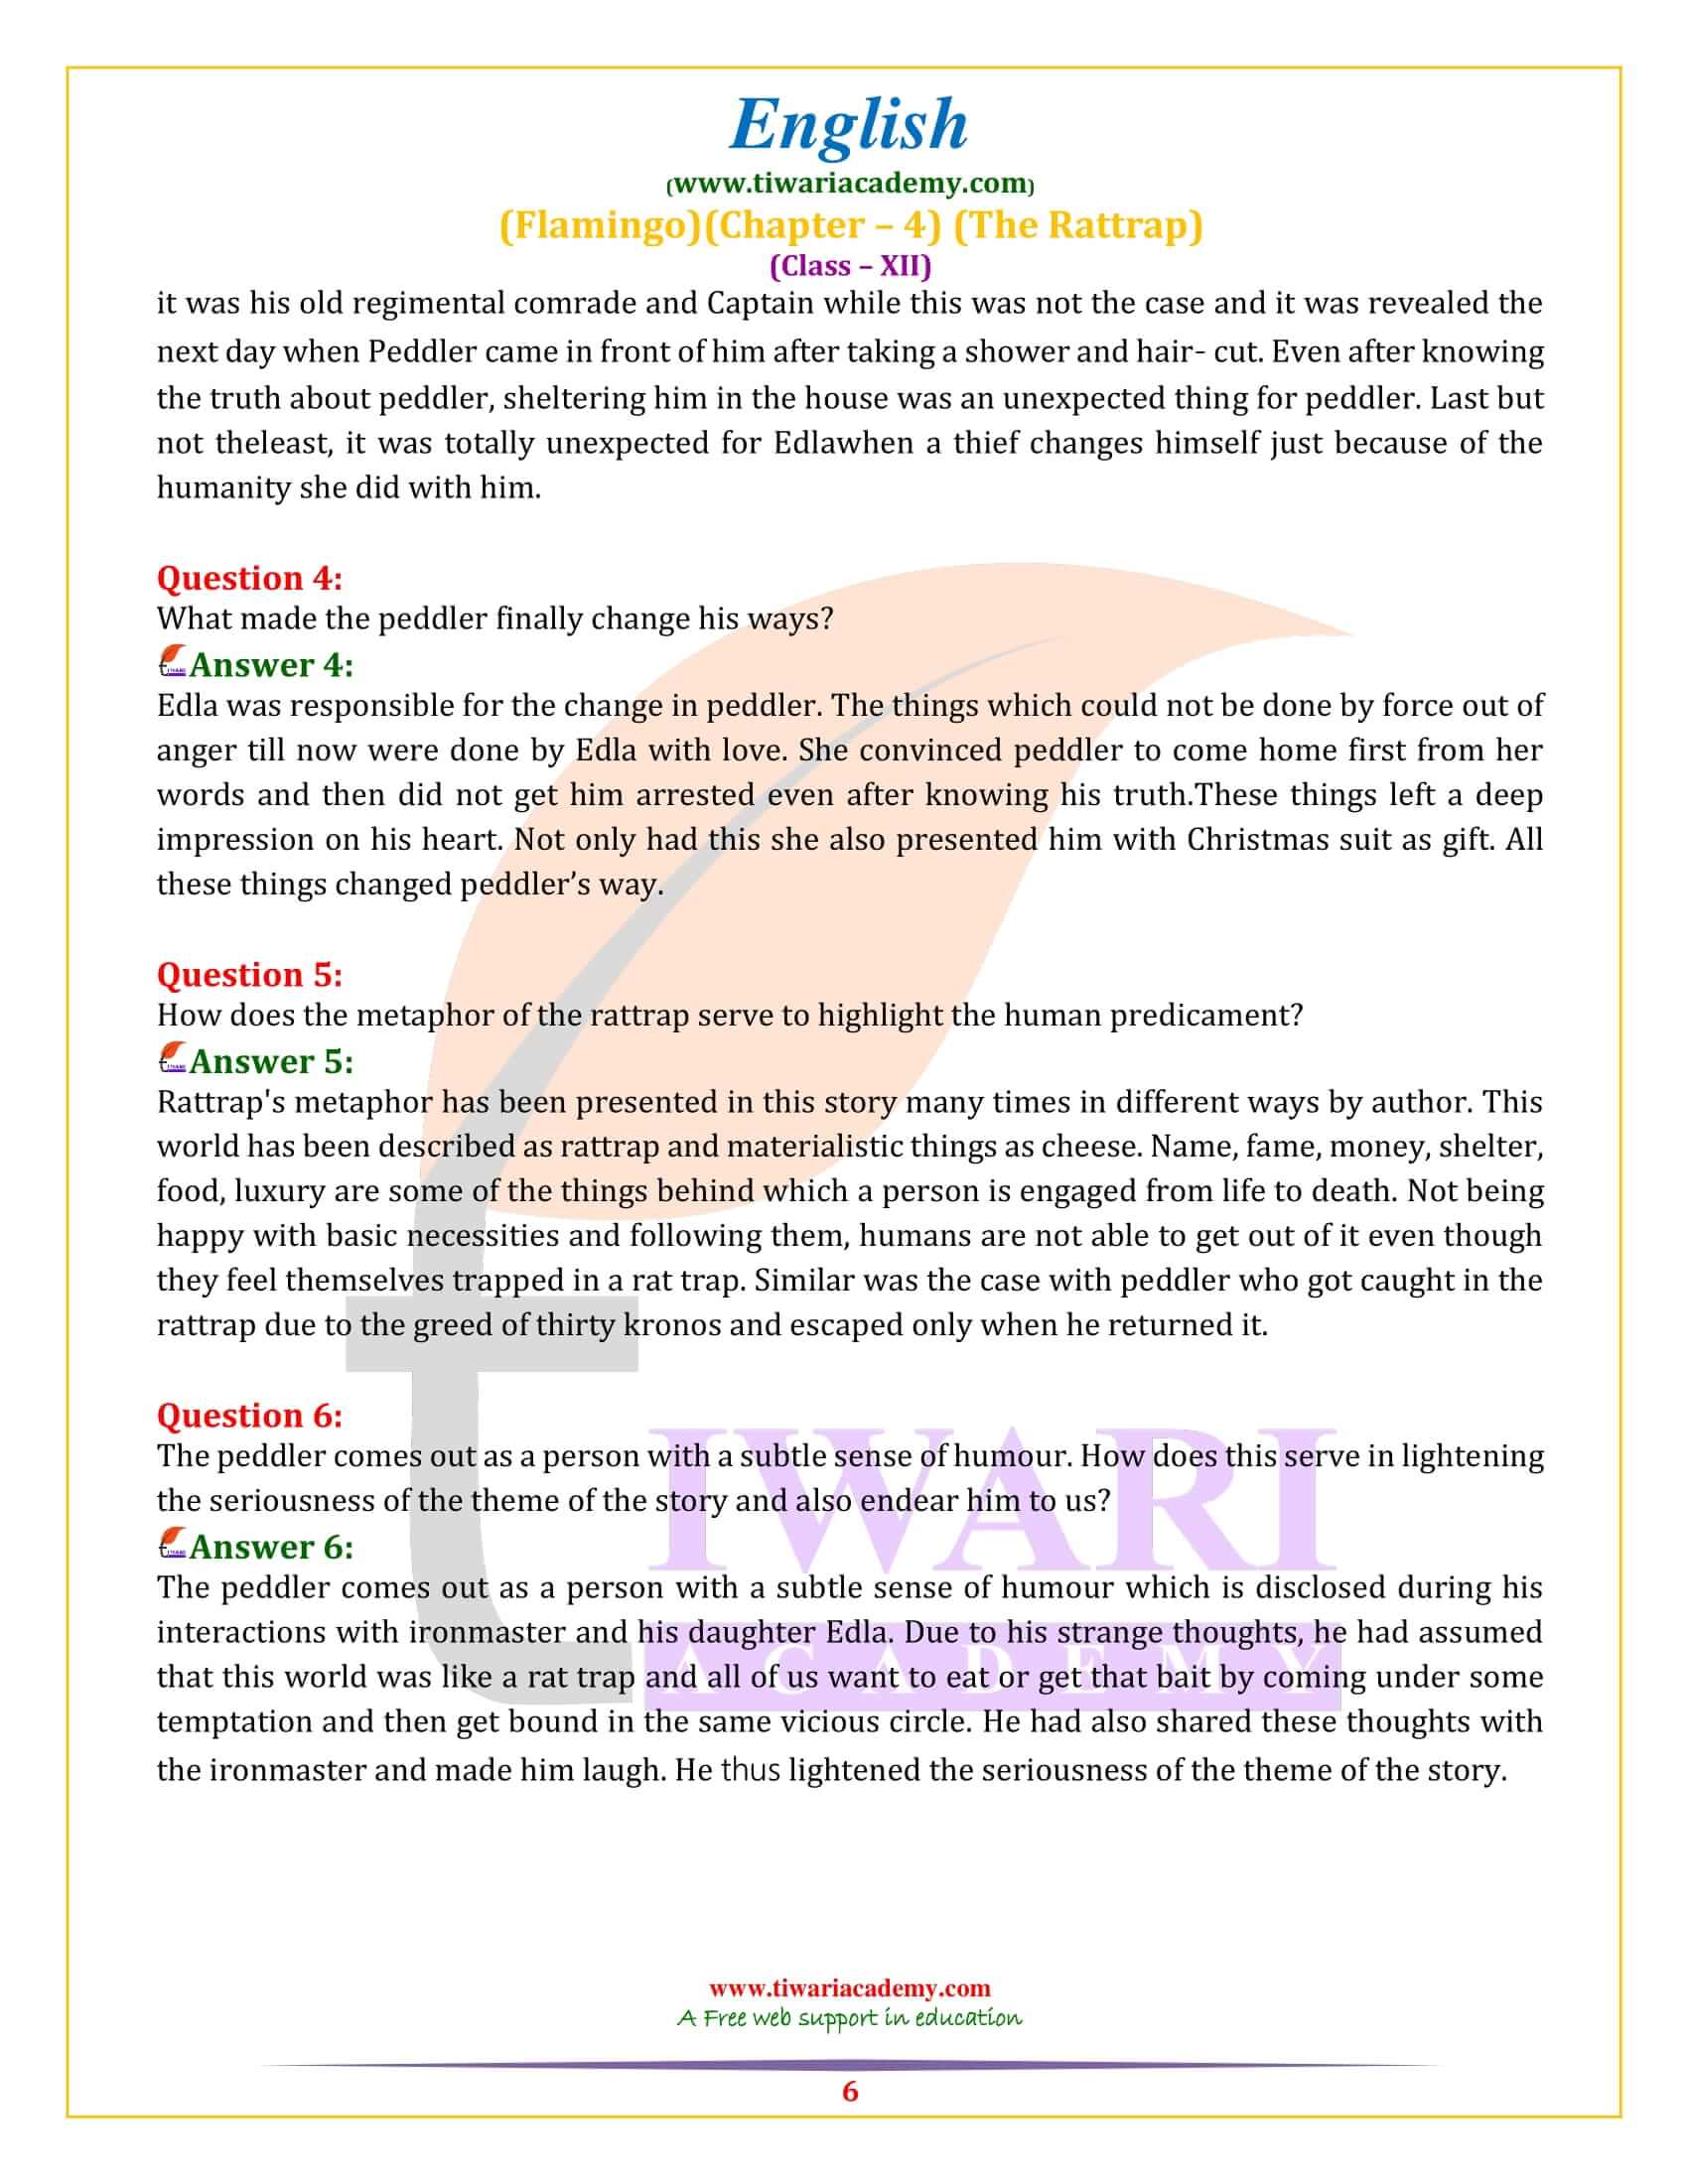 NCERT Solutions for Class 12 English Flamingo Chapter 4 Question answers